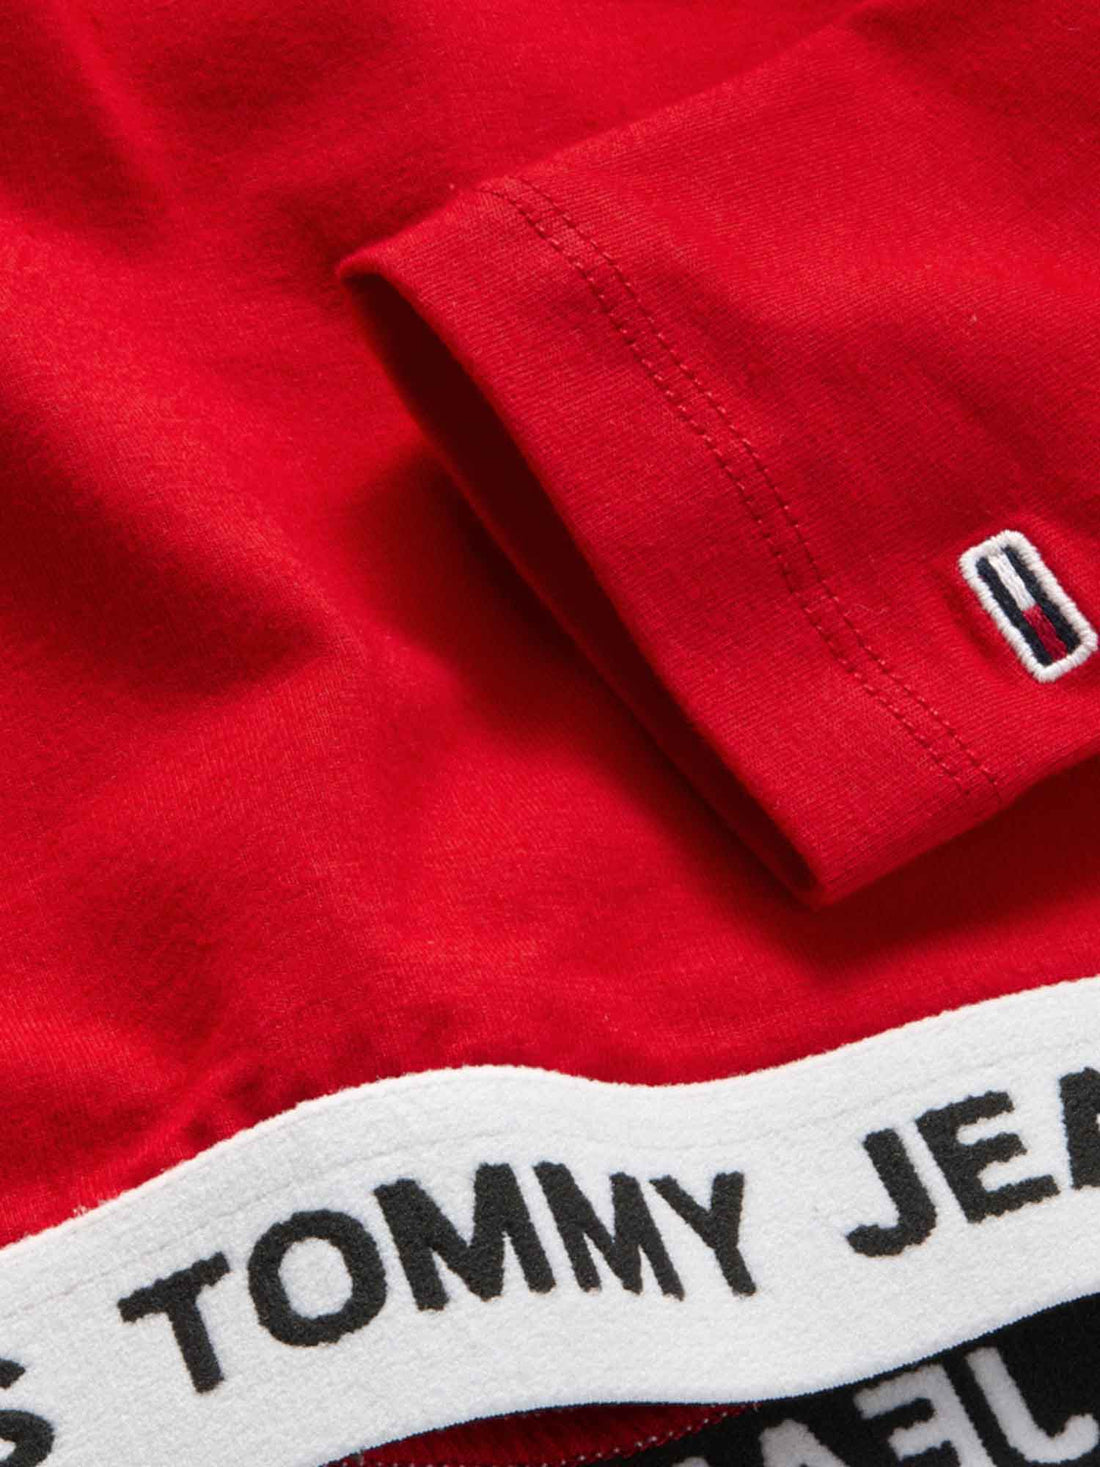 Top e canotte Rosso Tommy Jeans